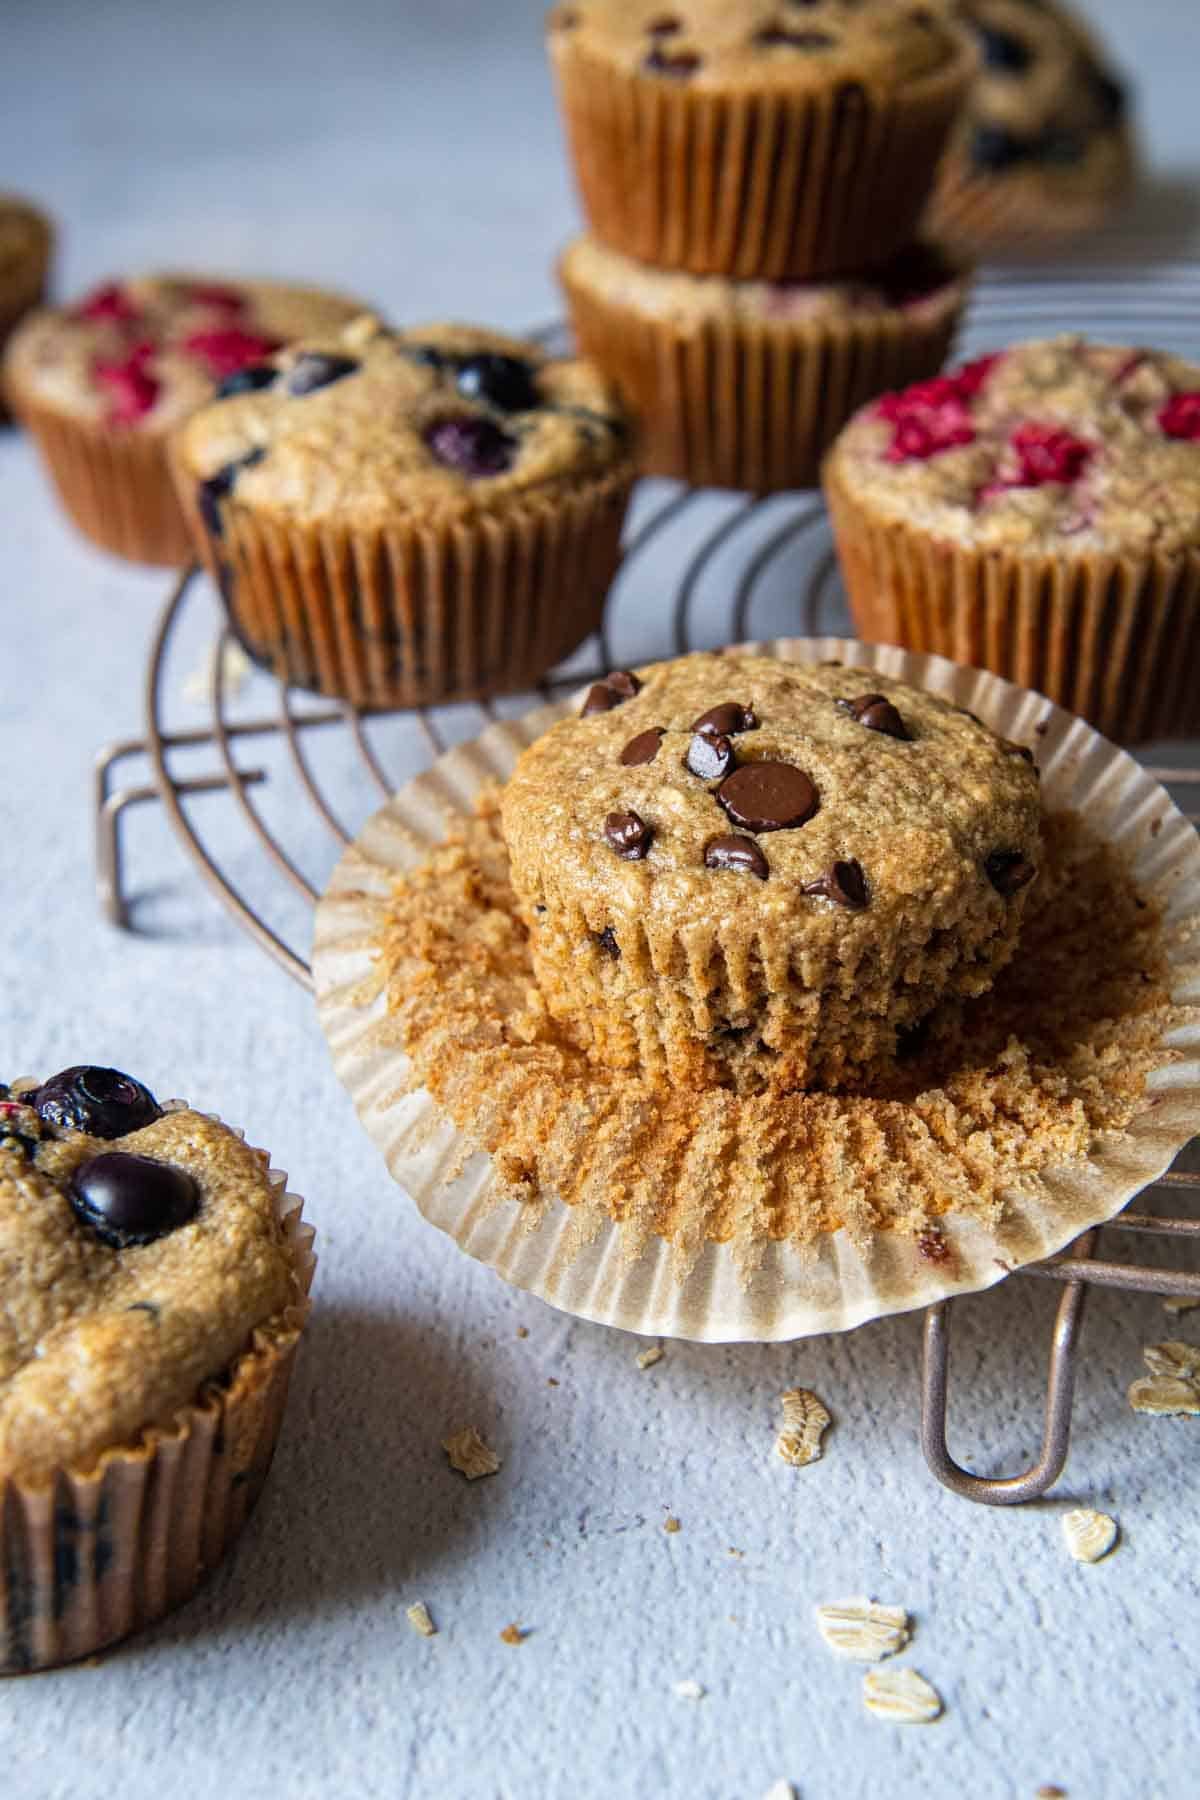 oatmeal muffins with chocolate chips and other varieties around.